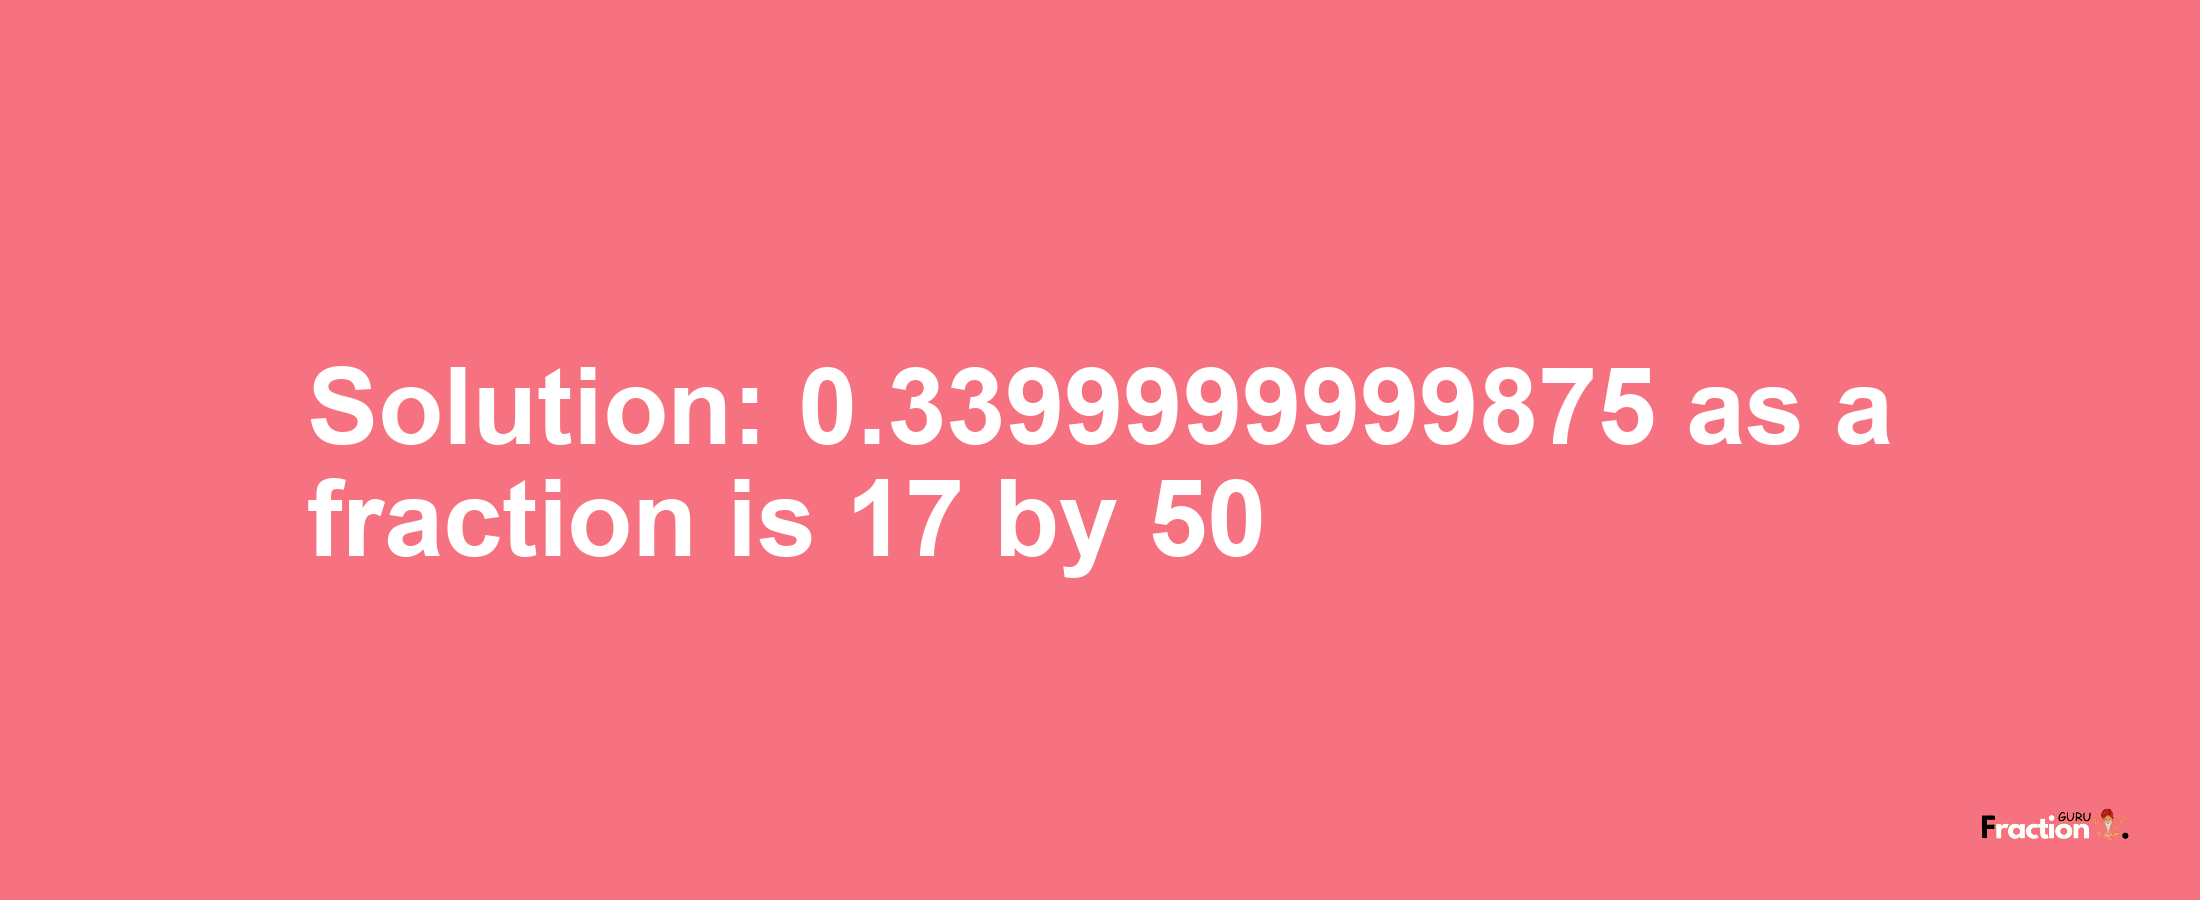 Solution:0.3399999999875 as a fraction is 17/50